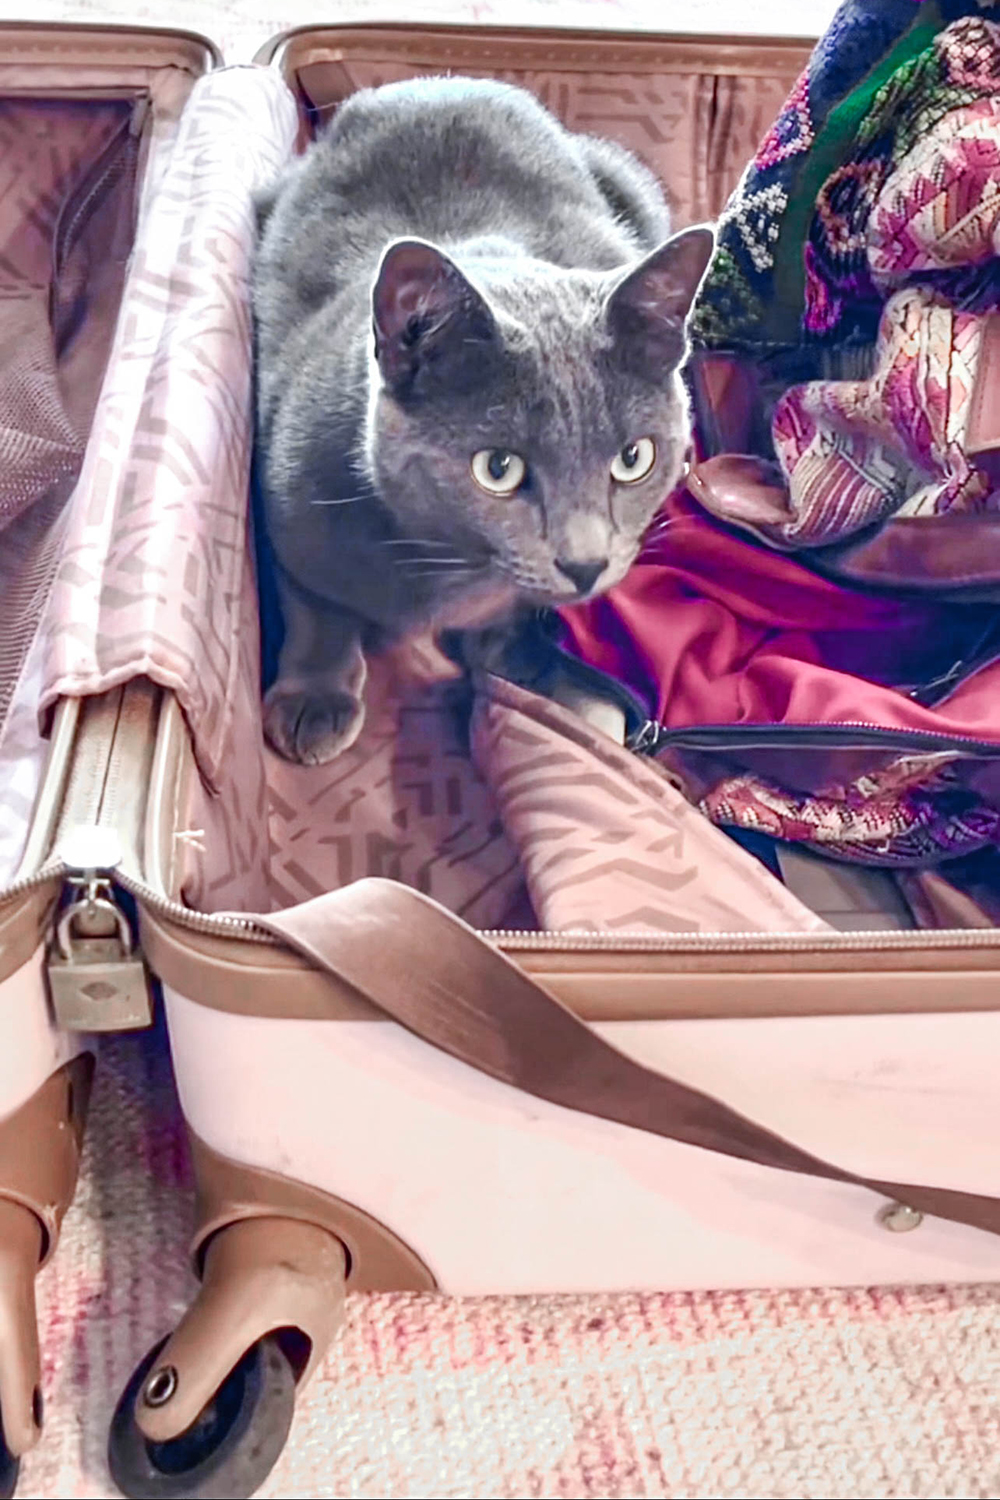 grey cat with greenish-yellow eyes inside a pink suitcase with wheels